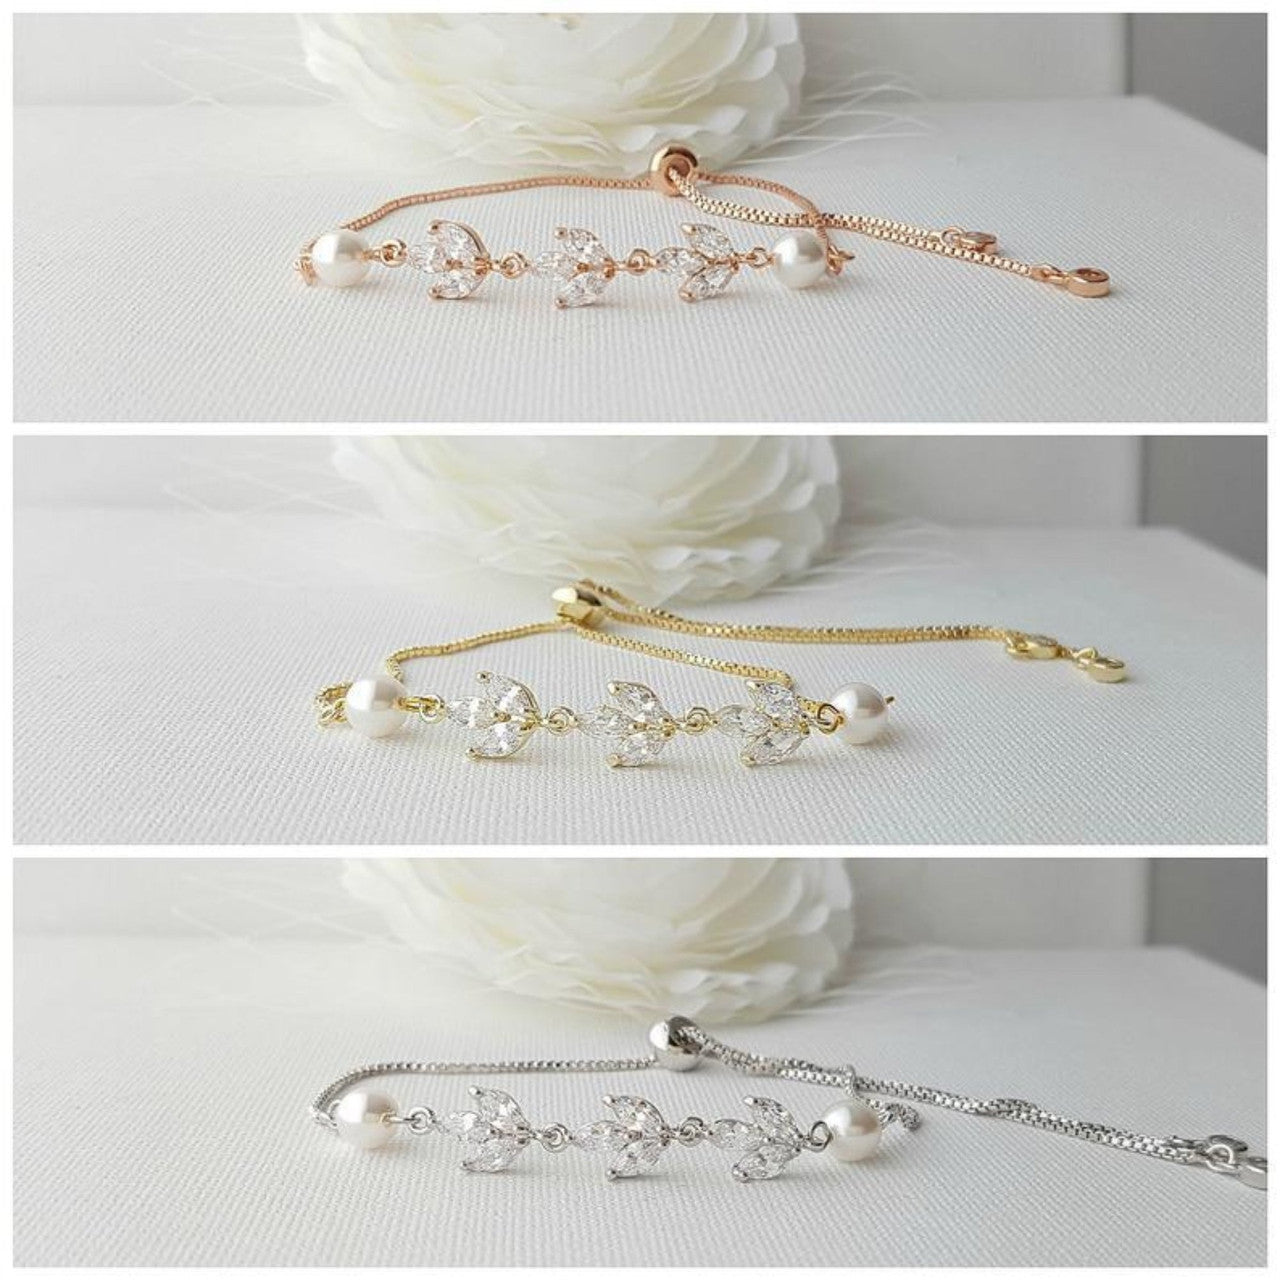 Jewellery Set for Brides in Simple Design- Rose Gold- Leila